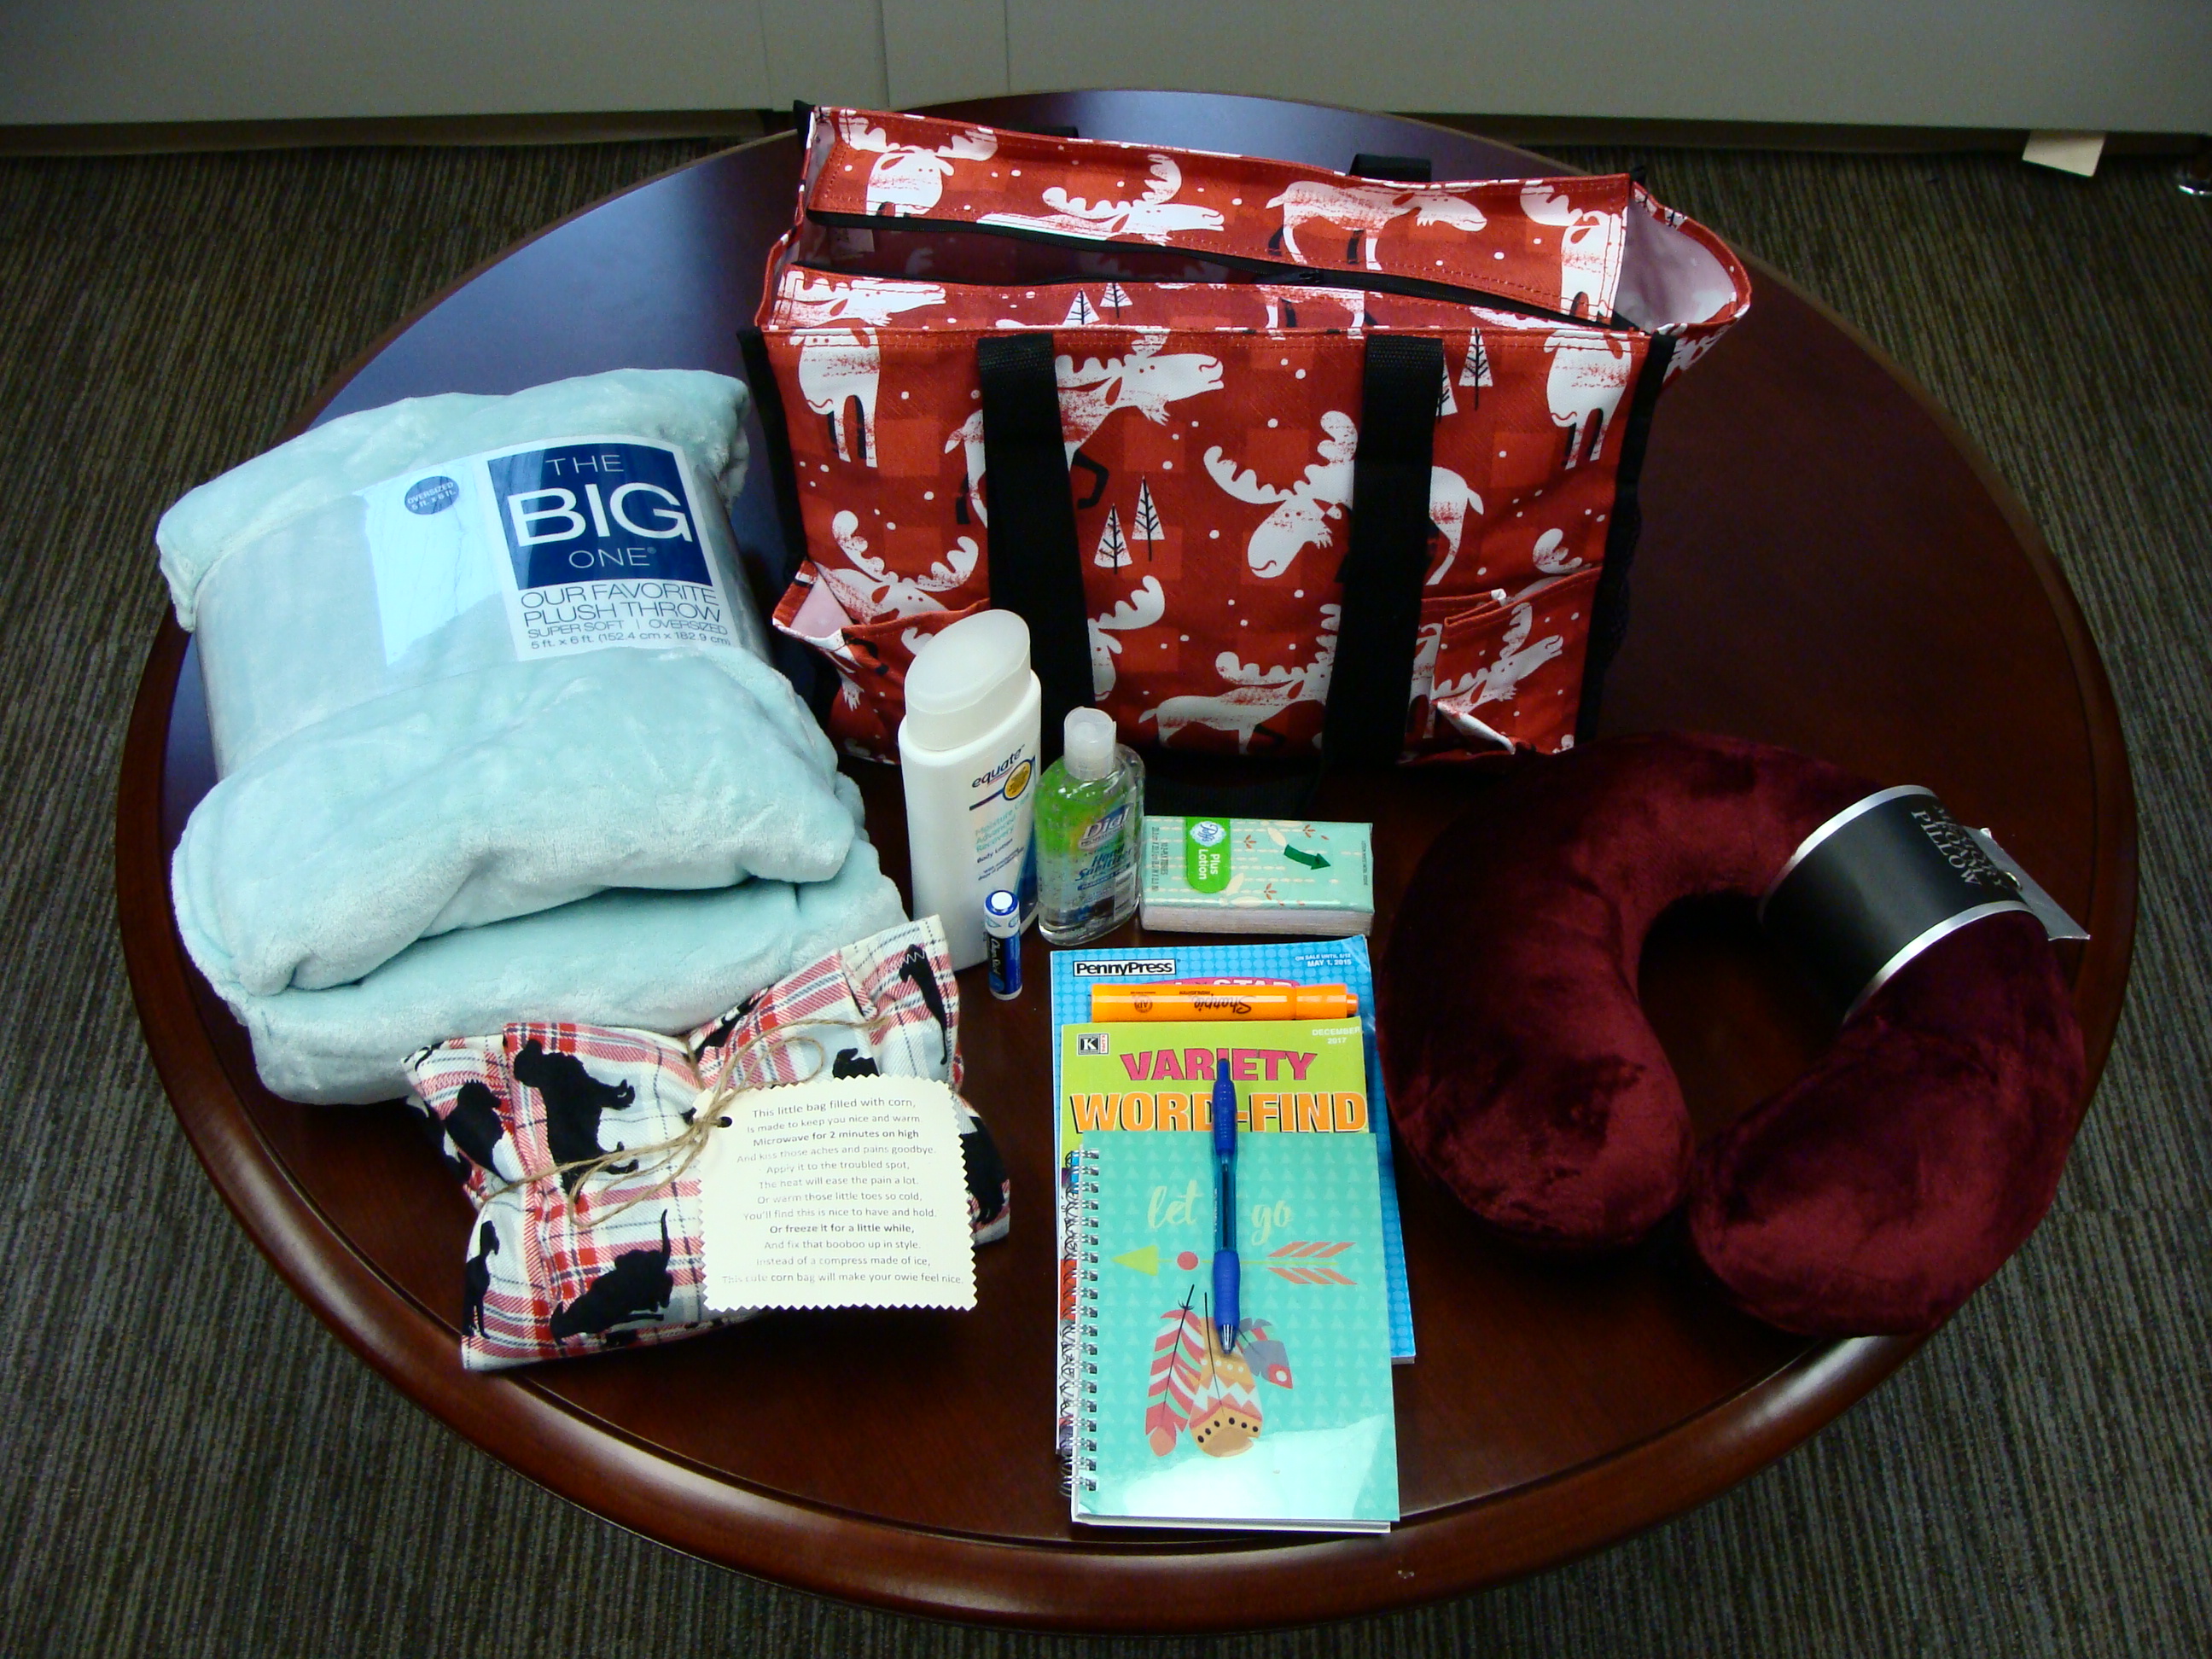 The Donation of Cancer Comfort Bags Help Patients at Essentia Health